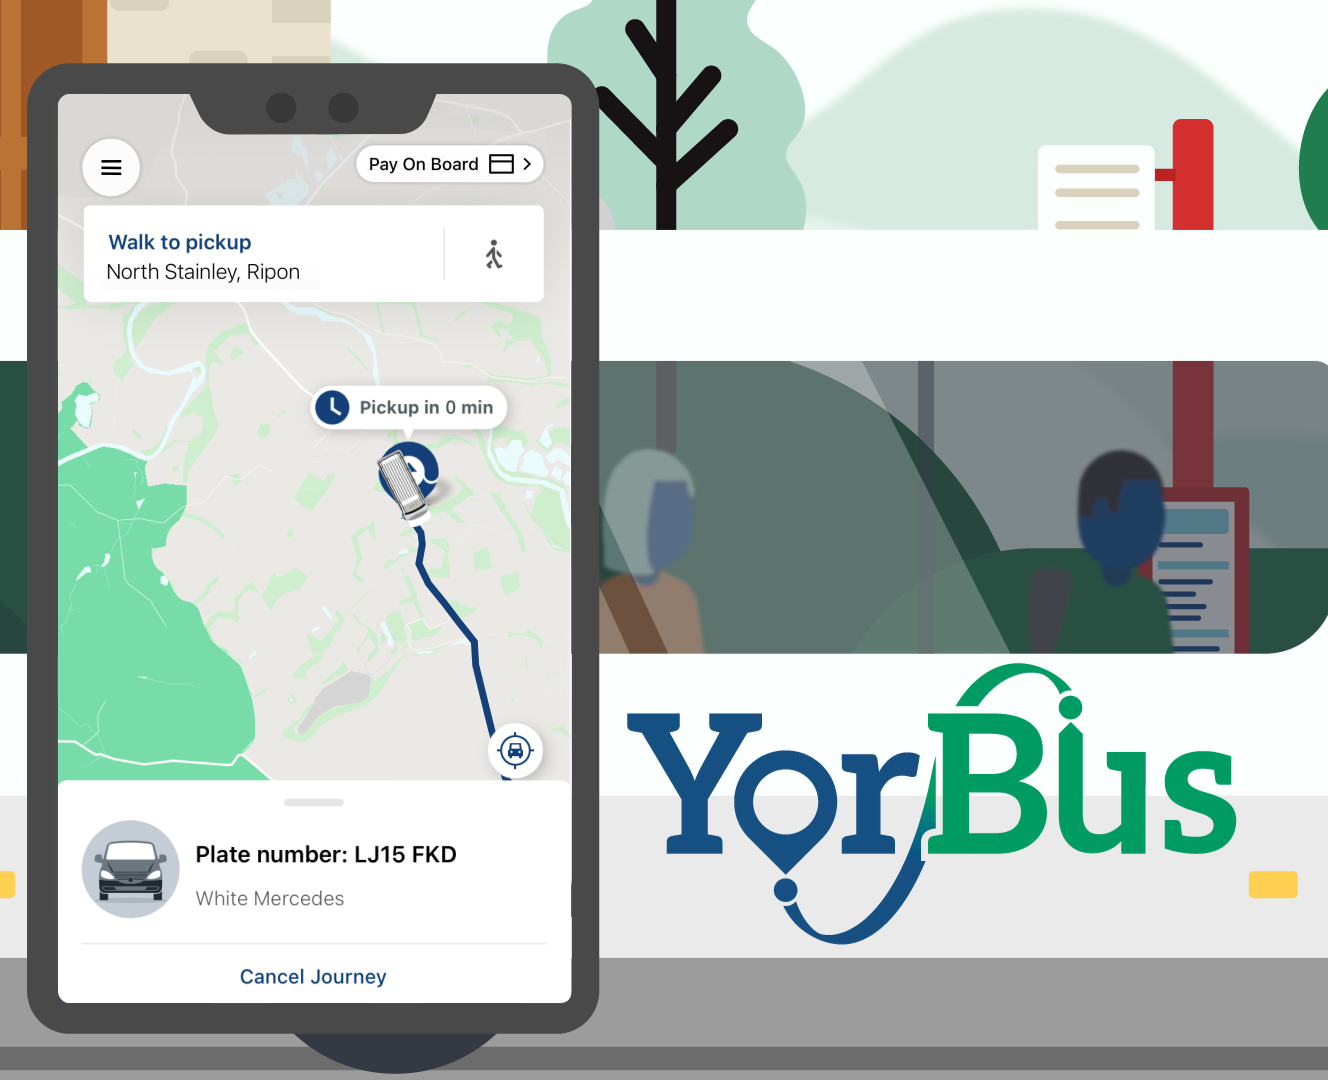 An image from the animation, showing the app for YorBus services running on a mobile device with a bus in the distance